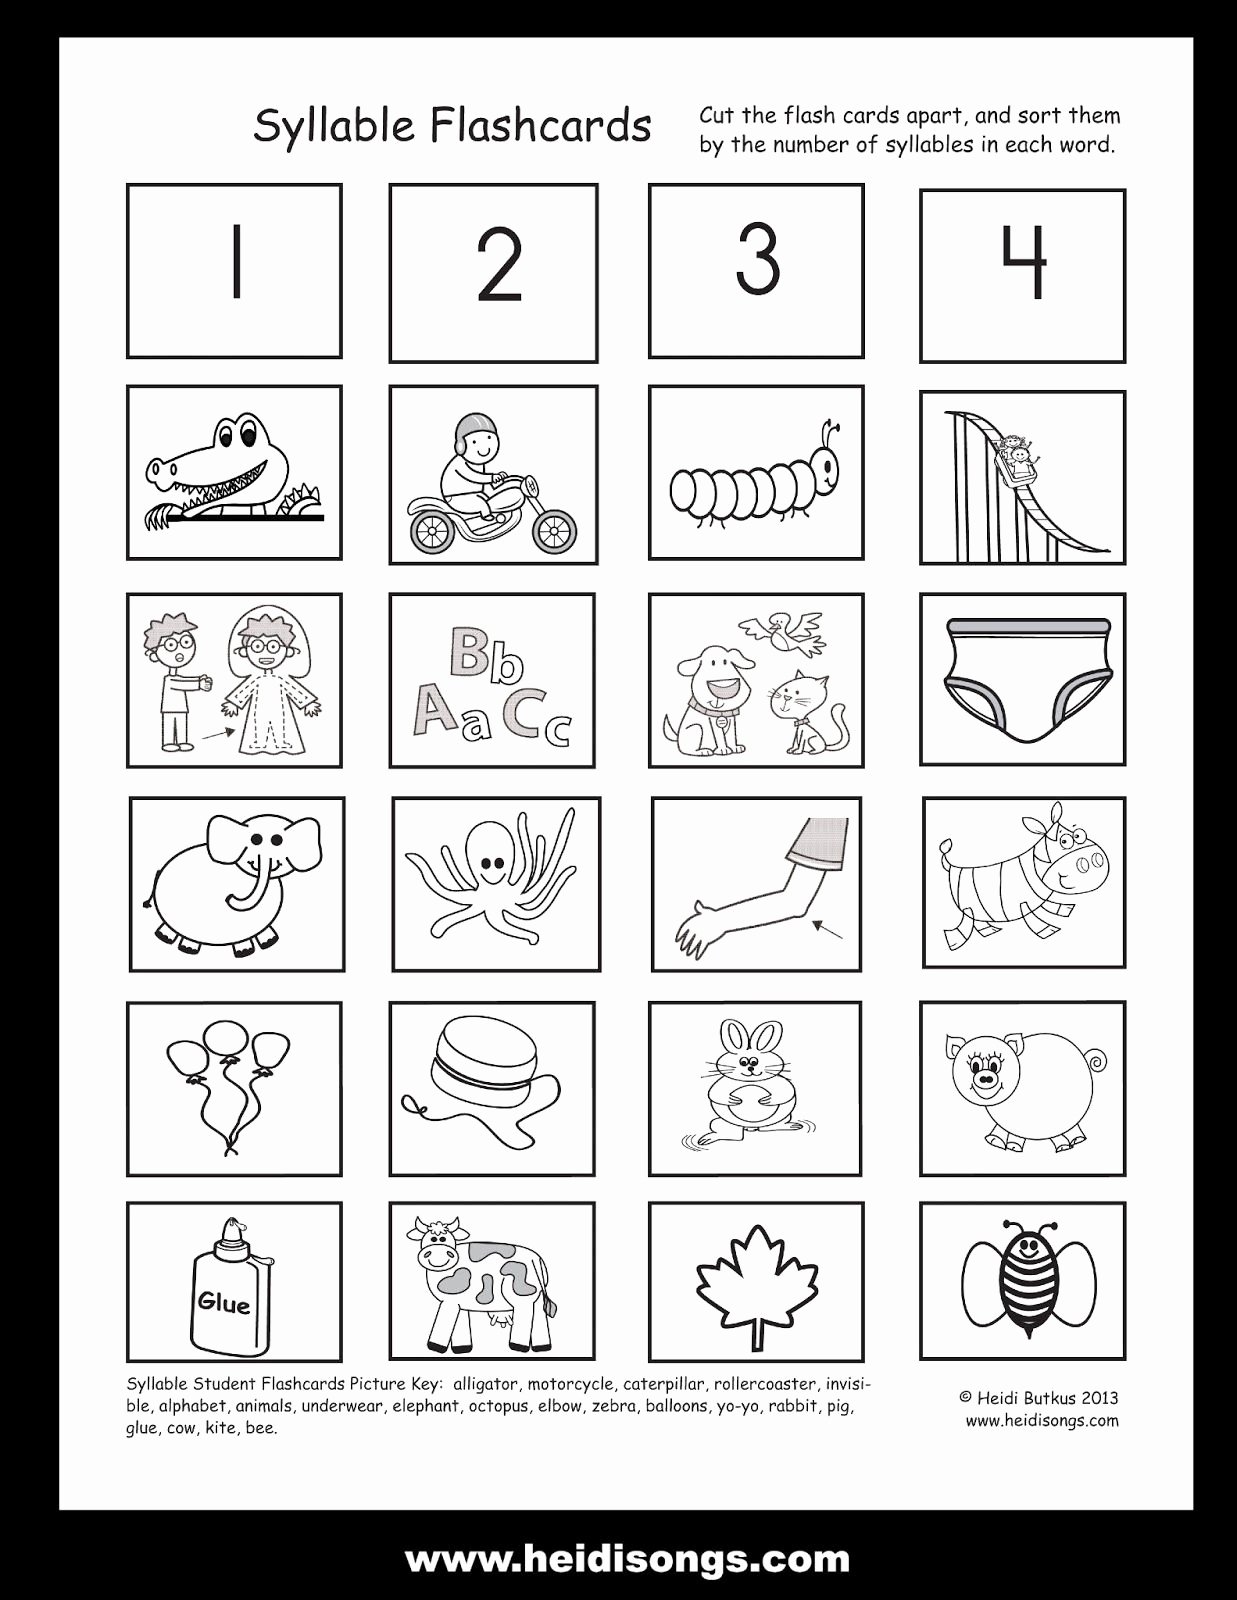 Syllable Worksheet for Kindergarten Inspirational Heidisongs Resource Small Syllable Flash Cards to Send